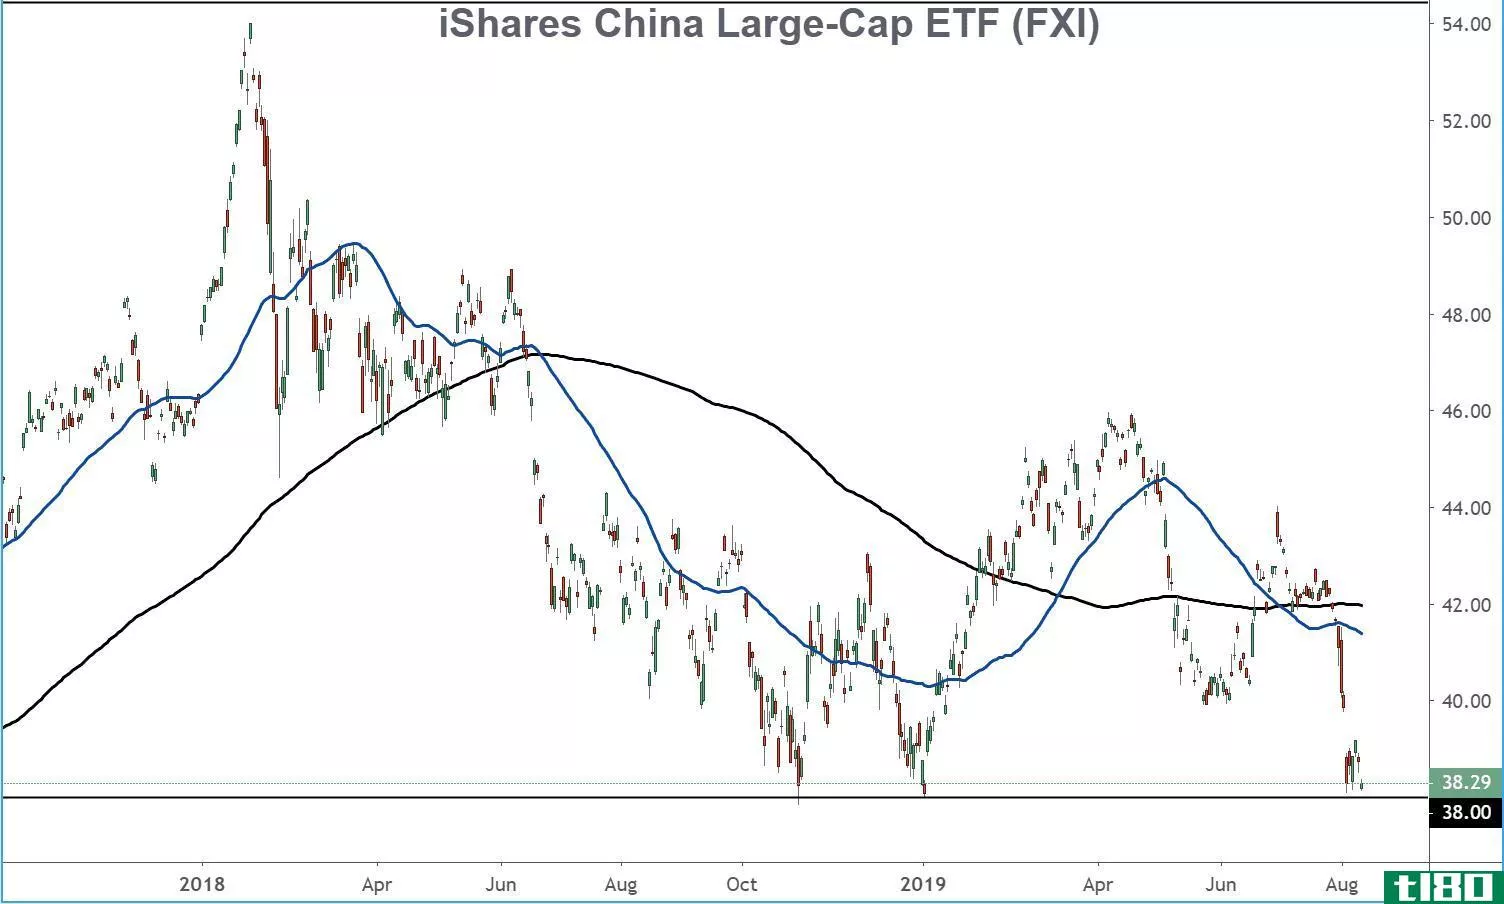 Chart showing the share price performance of the iShares China Large-Cap ETF (FXI)